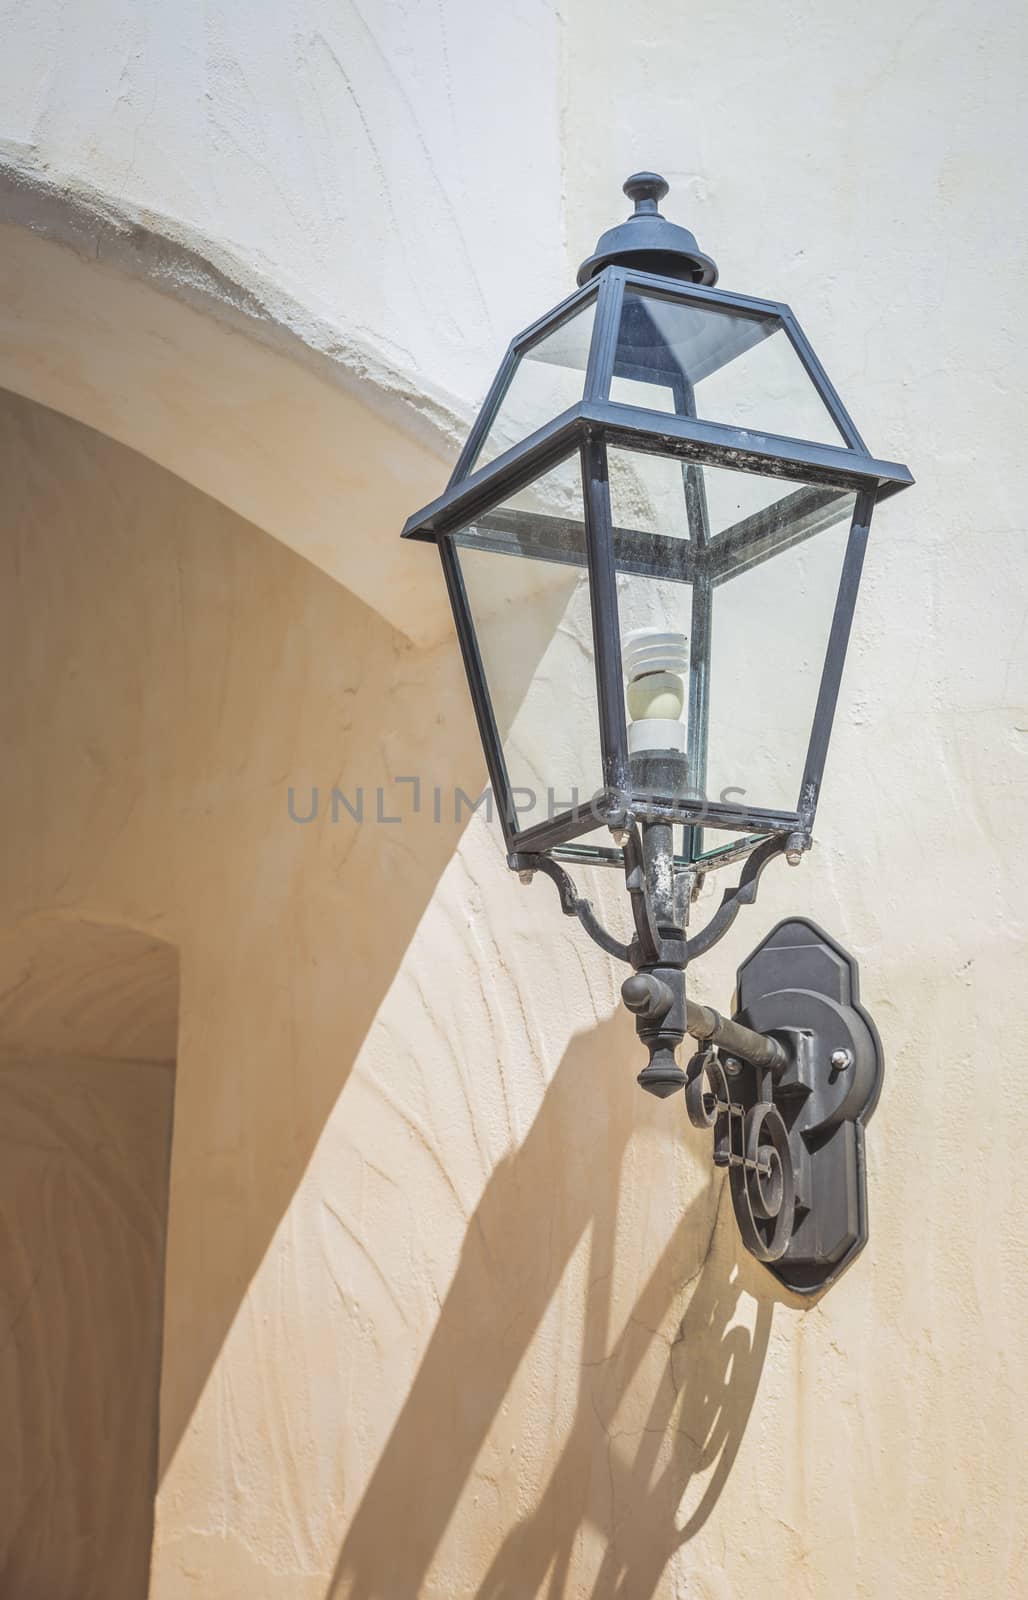 old vintage metal light with a modern led light inside against a white stone wall in sardinie